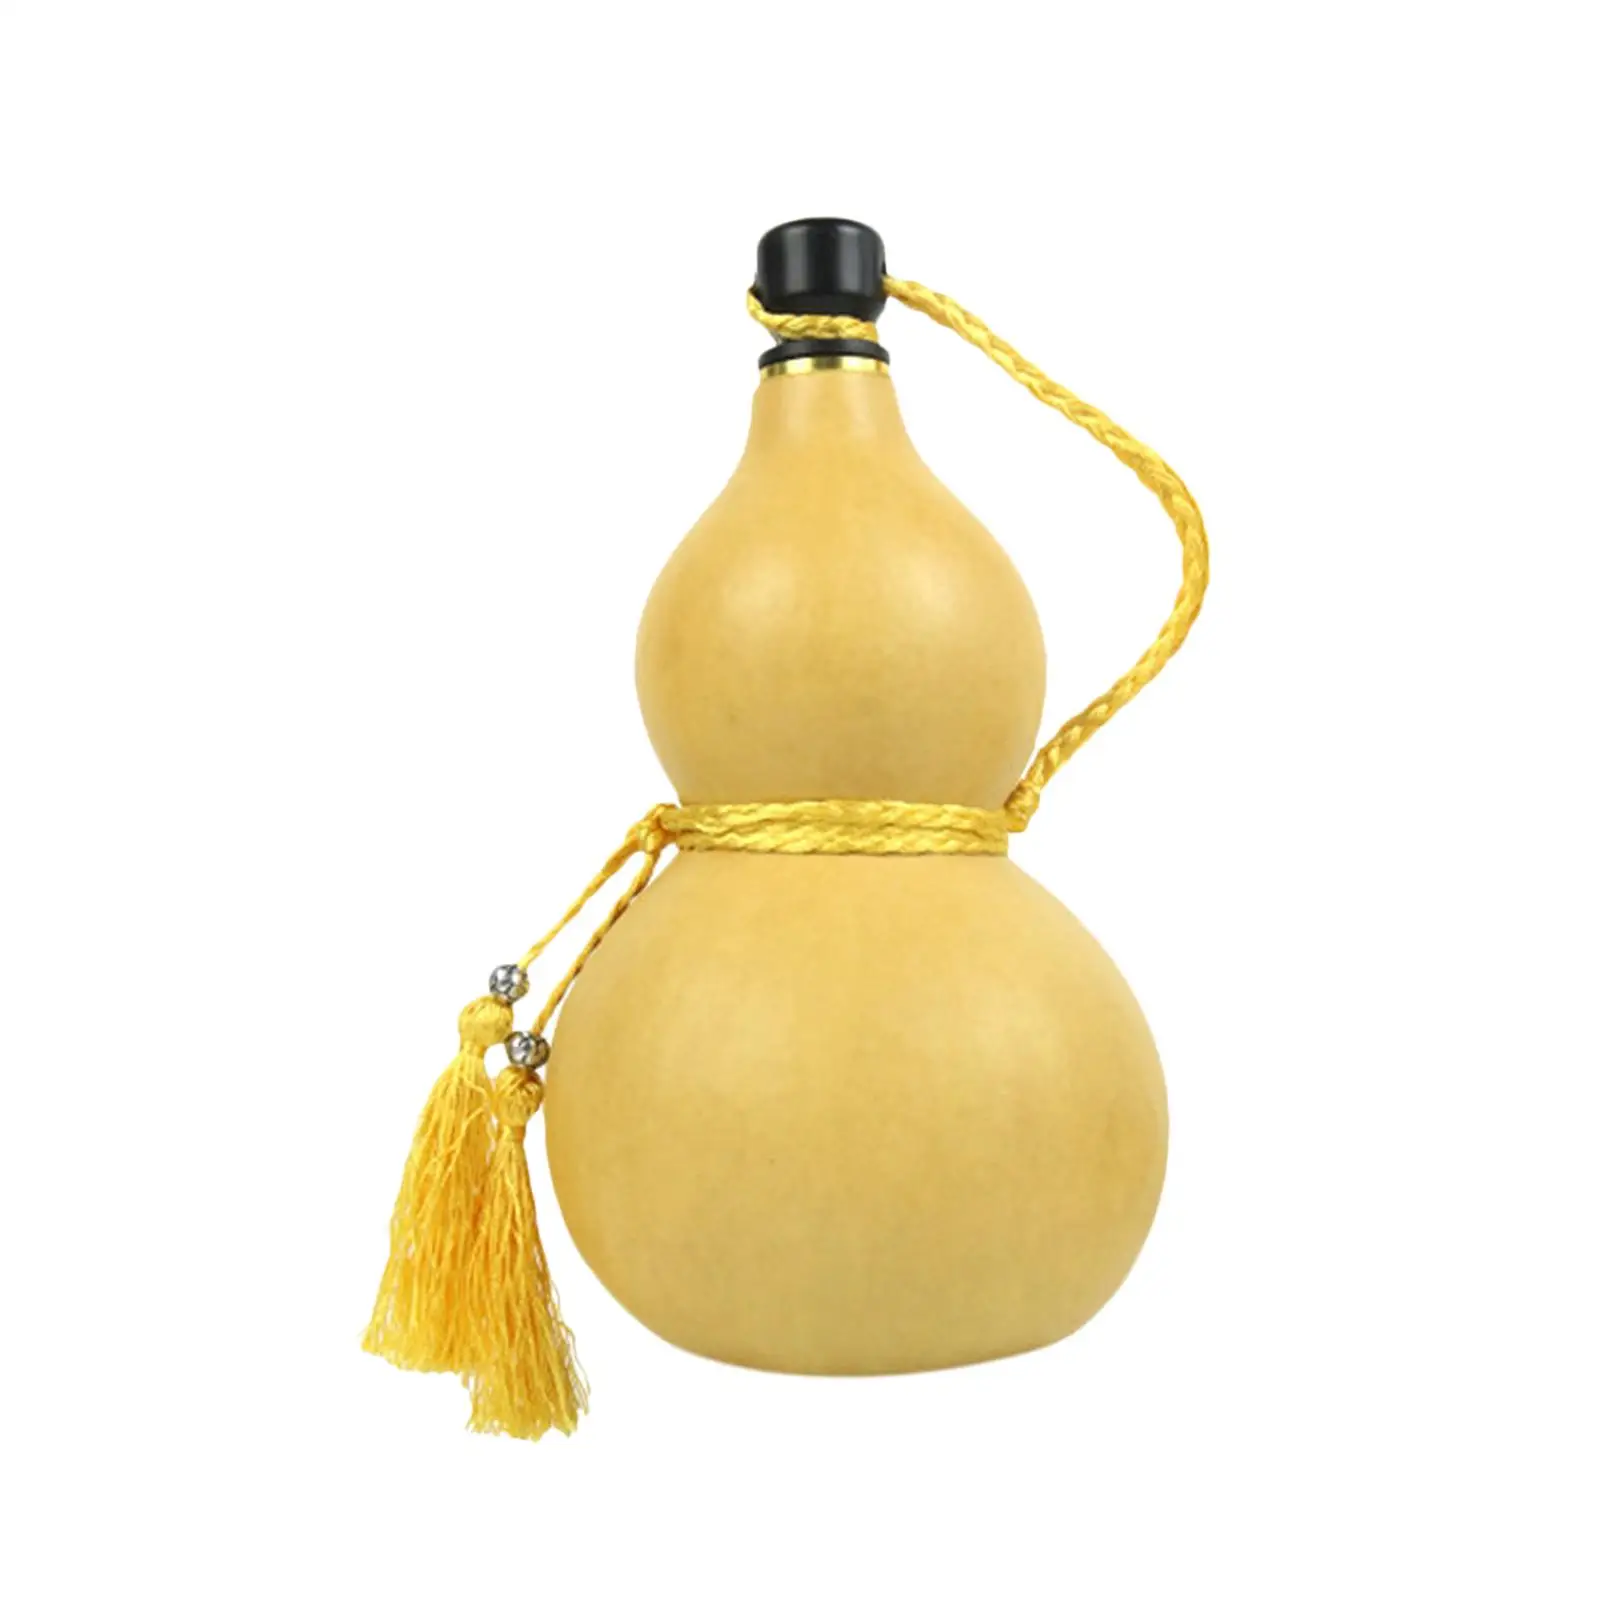 Gourd Wine Bottle Outdoor Activities Dried Gourd Drinking Bottle Decorative Water Bottle for Home Desk Living Room Decoration